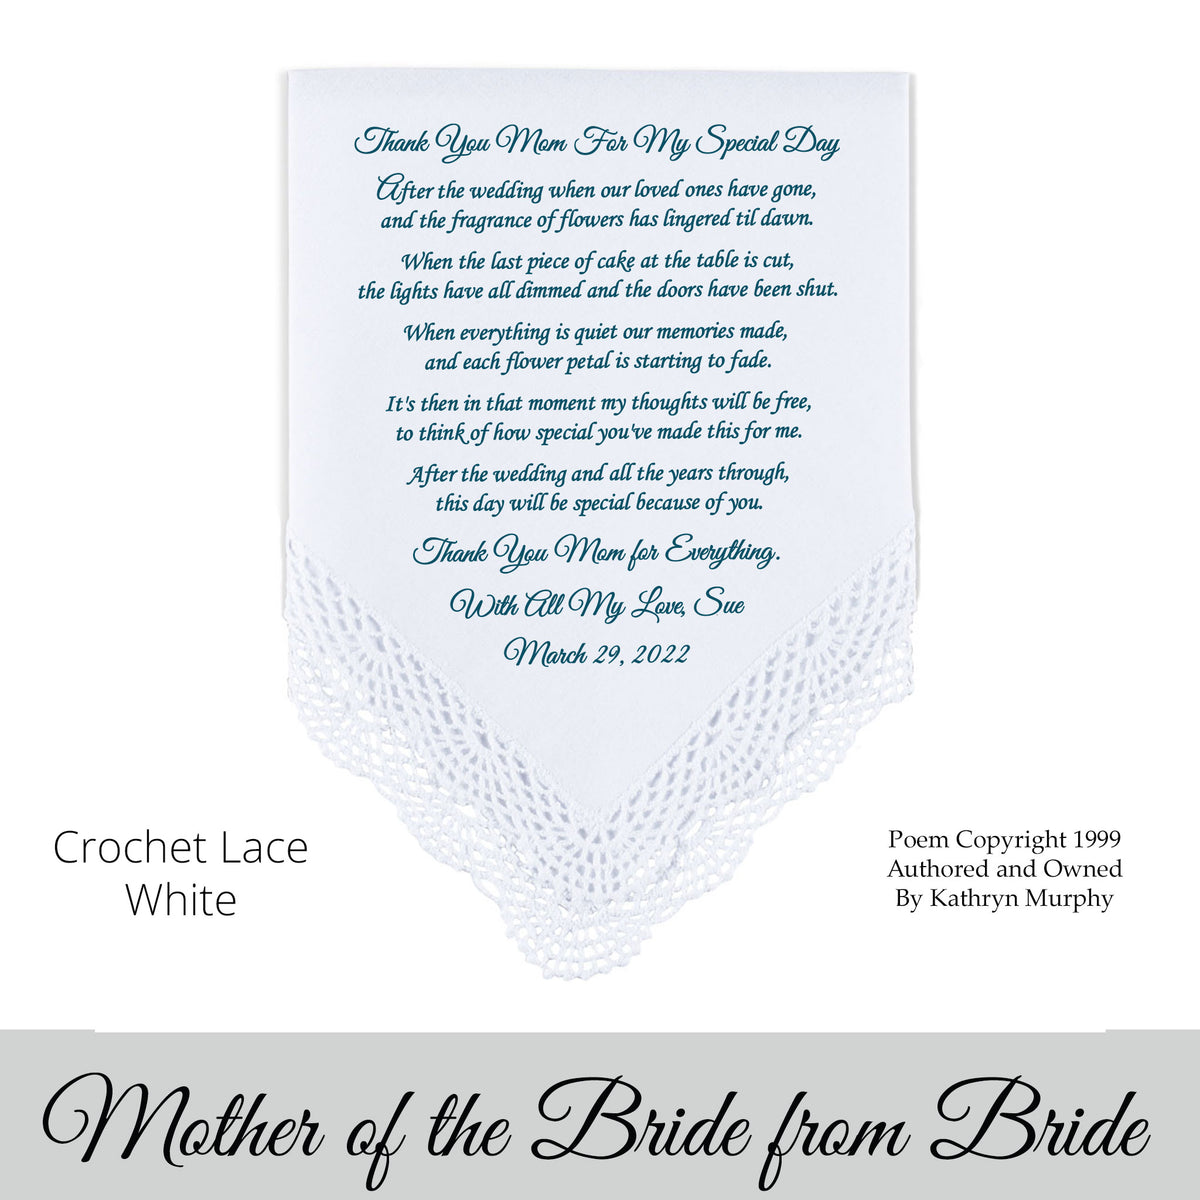 Wedding hankie for the mother of the bride with a printed poem 